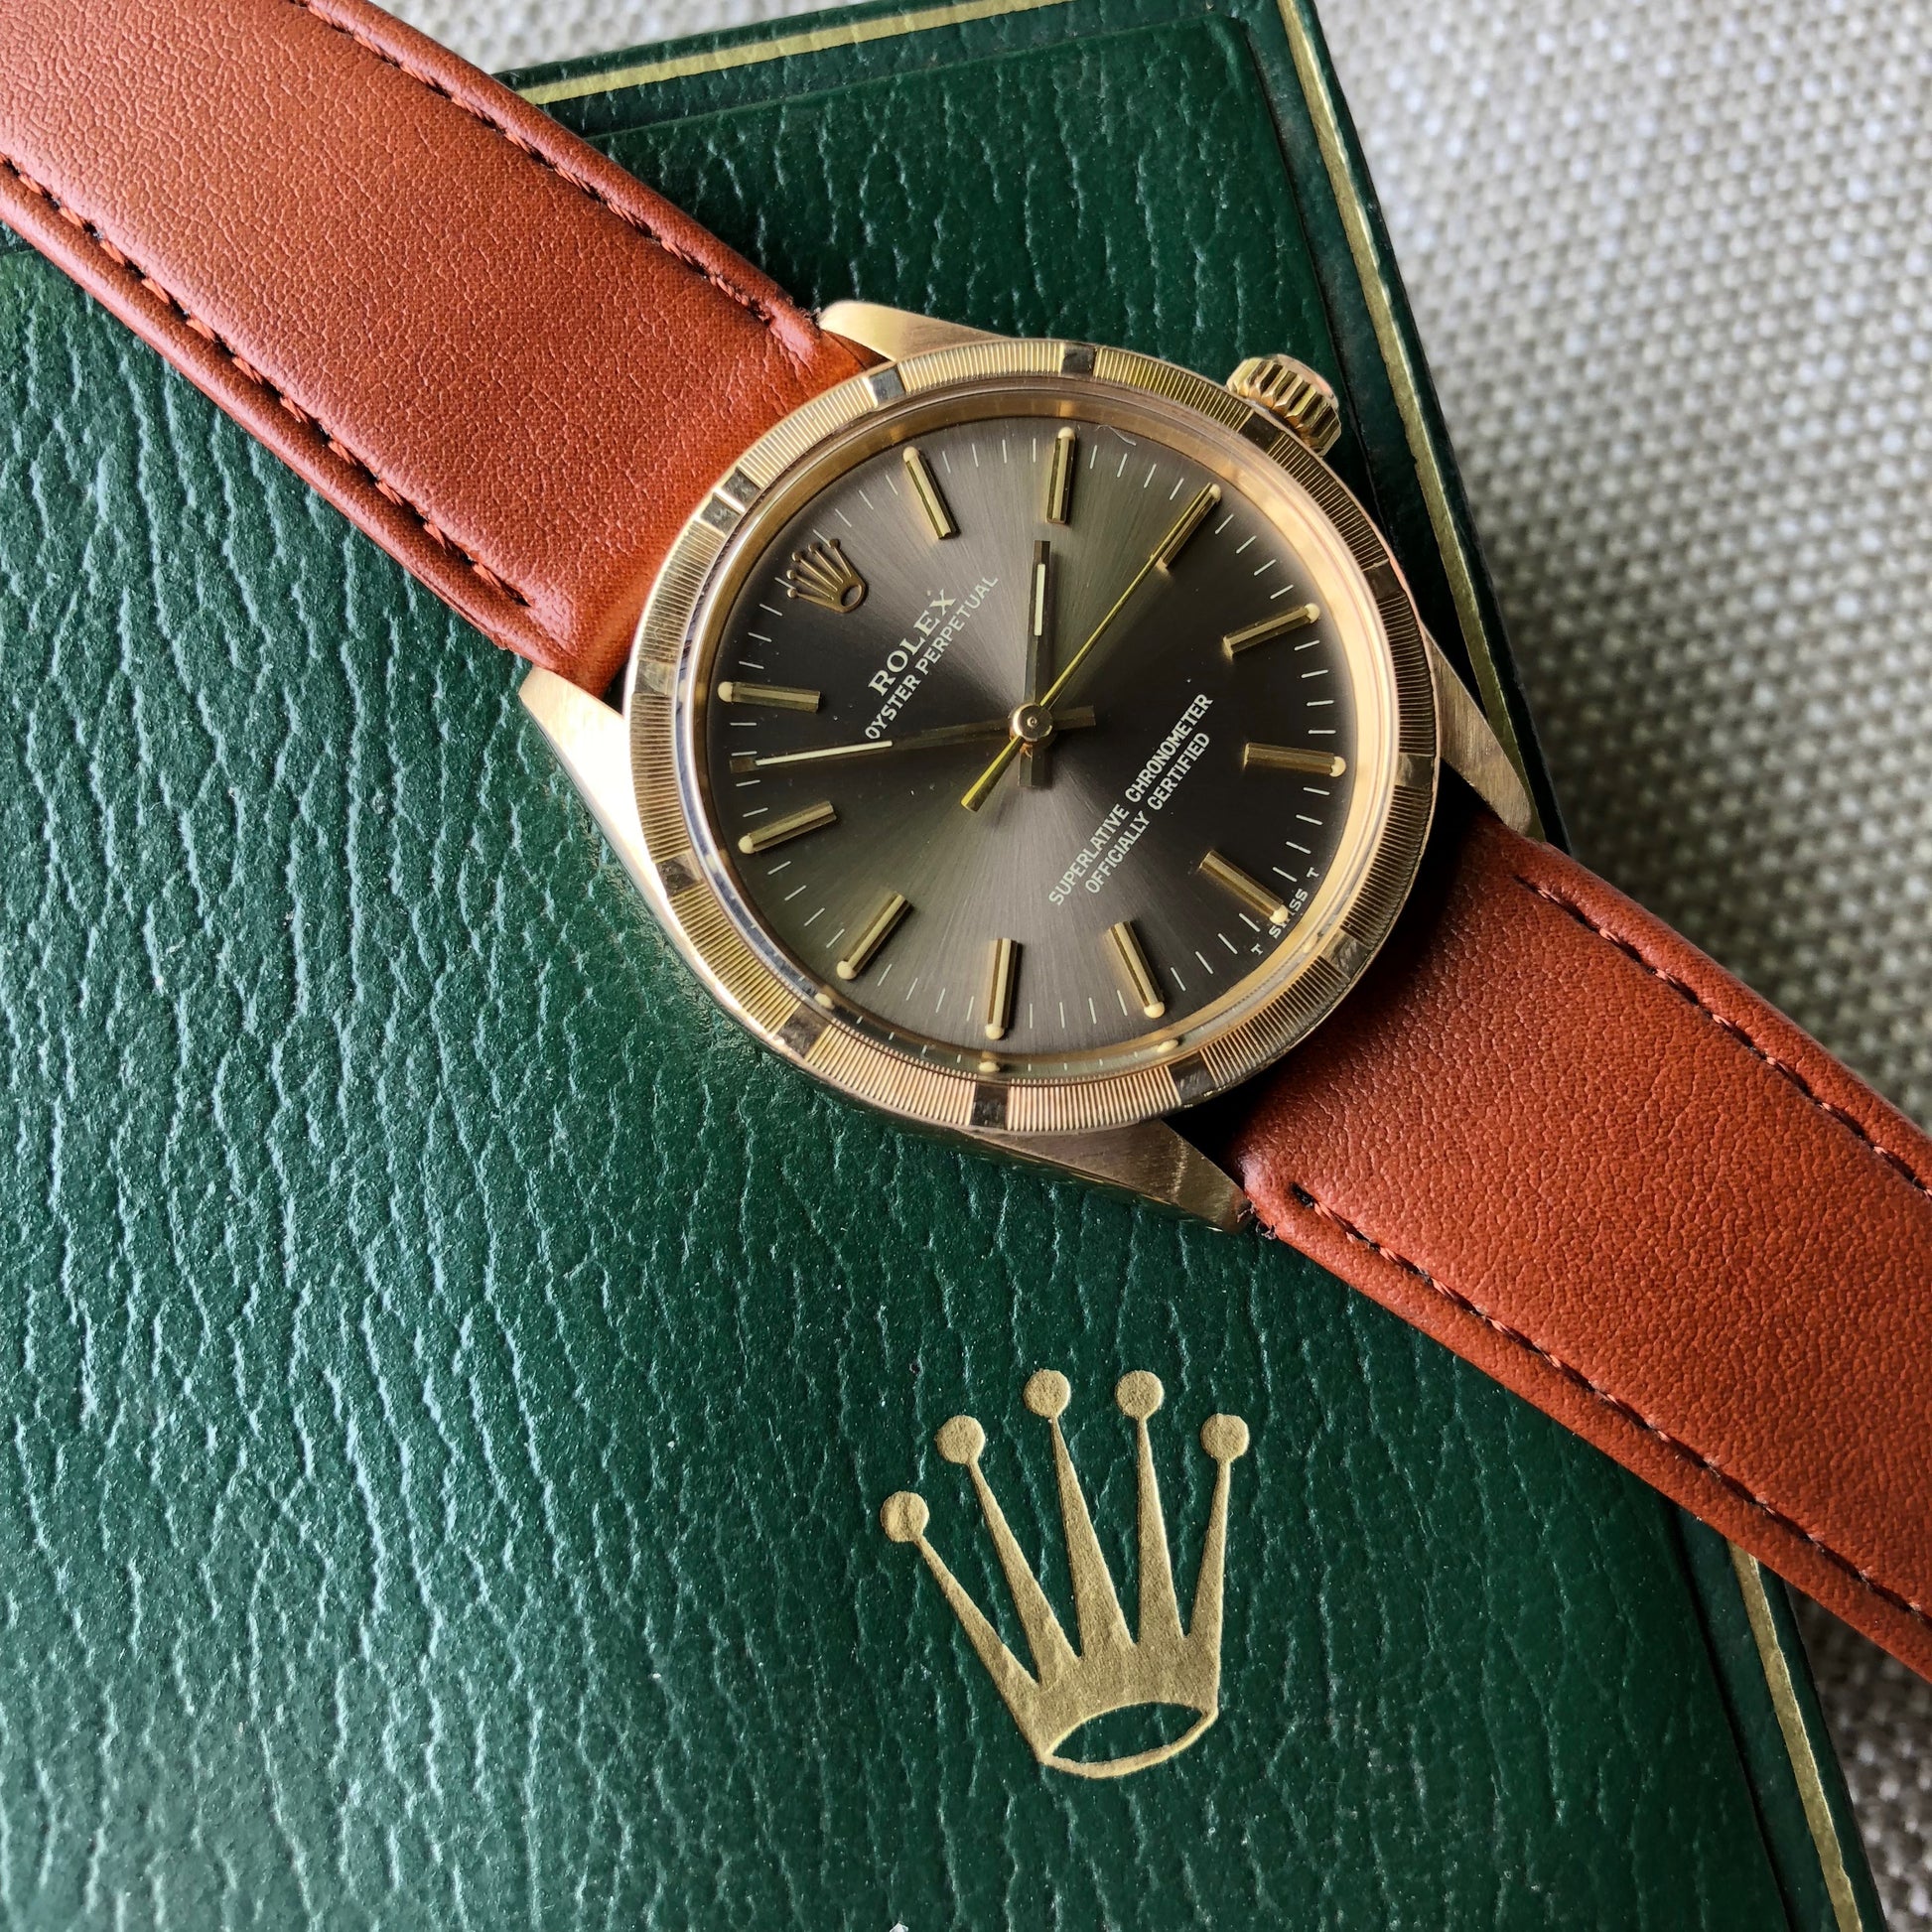 Vintage Rolex Oyster Perpetual 1007 18K Yellow Gold Caliber 1570 Automatic Wristwatch Box Papers Circa 1971 - Hashtag Watch Company